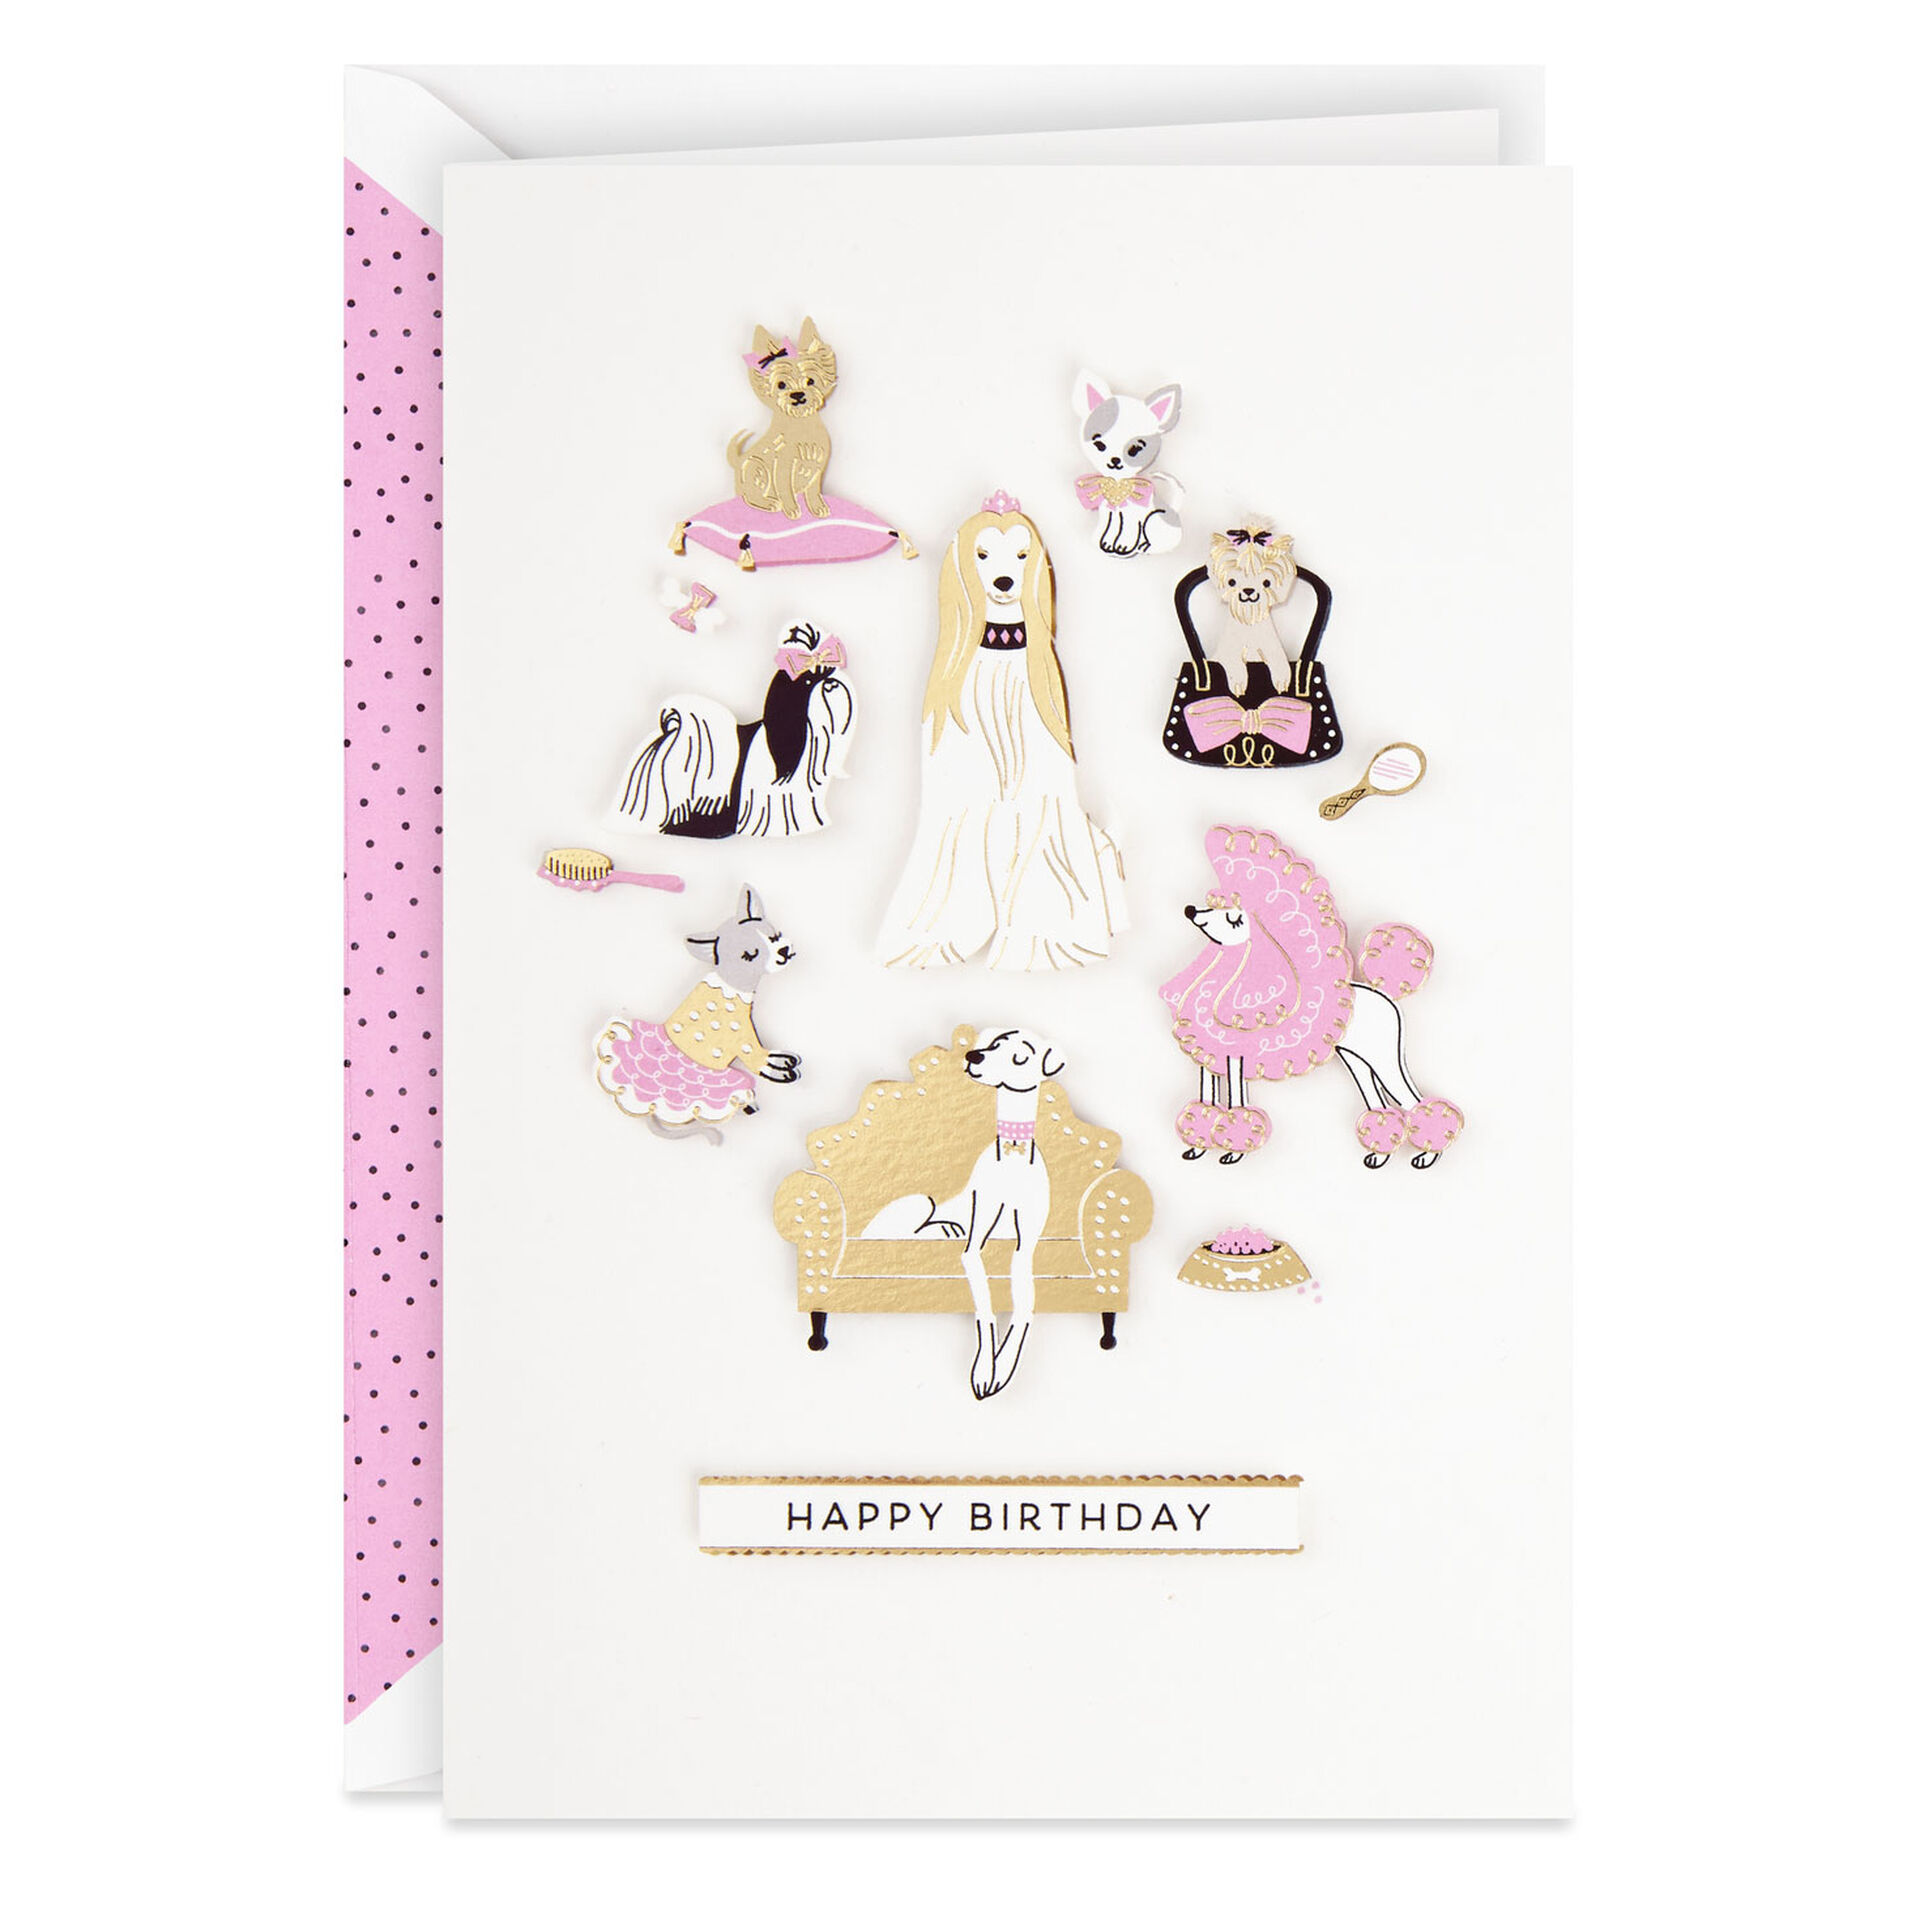 Cool-Bitch-DressedUp-Dogs-Birthday-Card-for-Her_699LAD9692_01